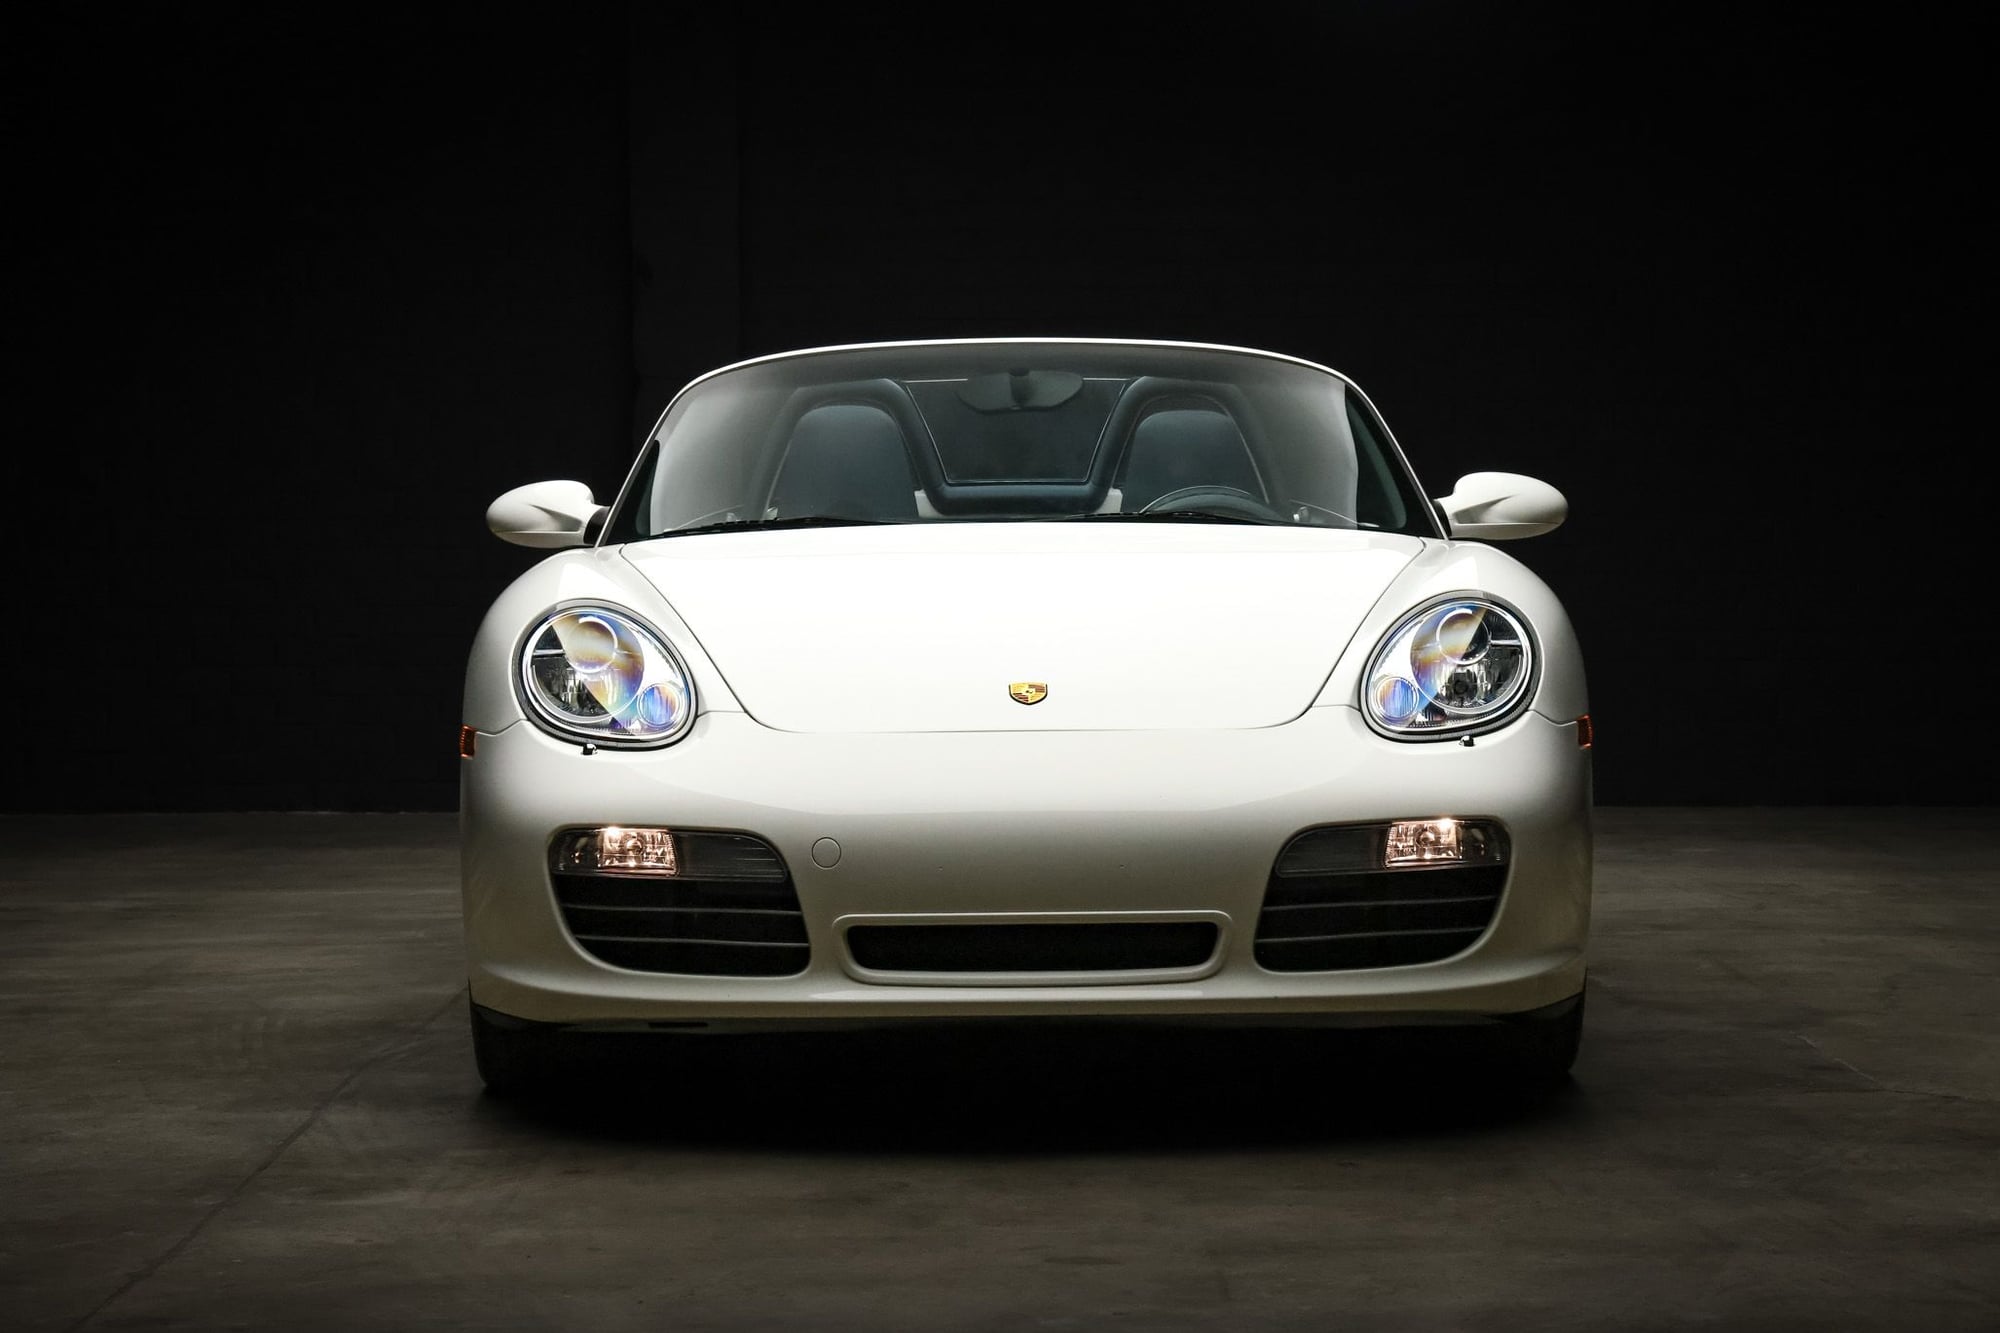 2005 Porsche Boxster - Family Owned 2005 Boxster S - Used - VIN WP0CB29825U732111 - 30,000 Miles - 6 cyl - 2WD - Manual - Convertible - White - Ventura, CA 93003, United States